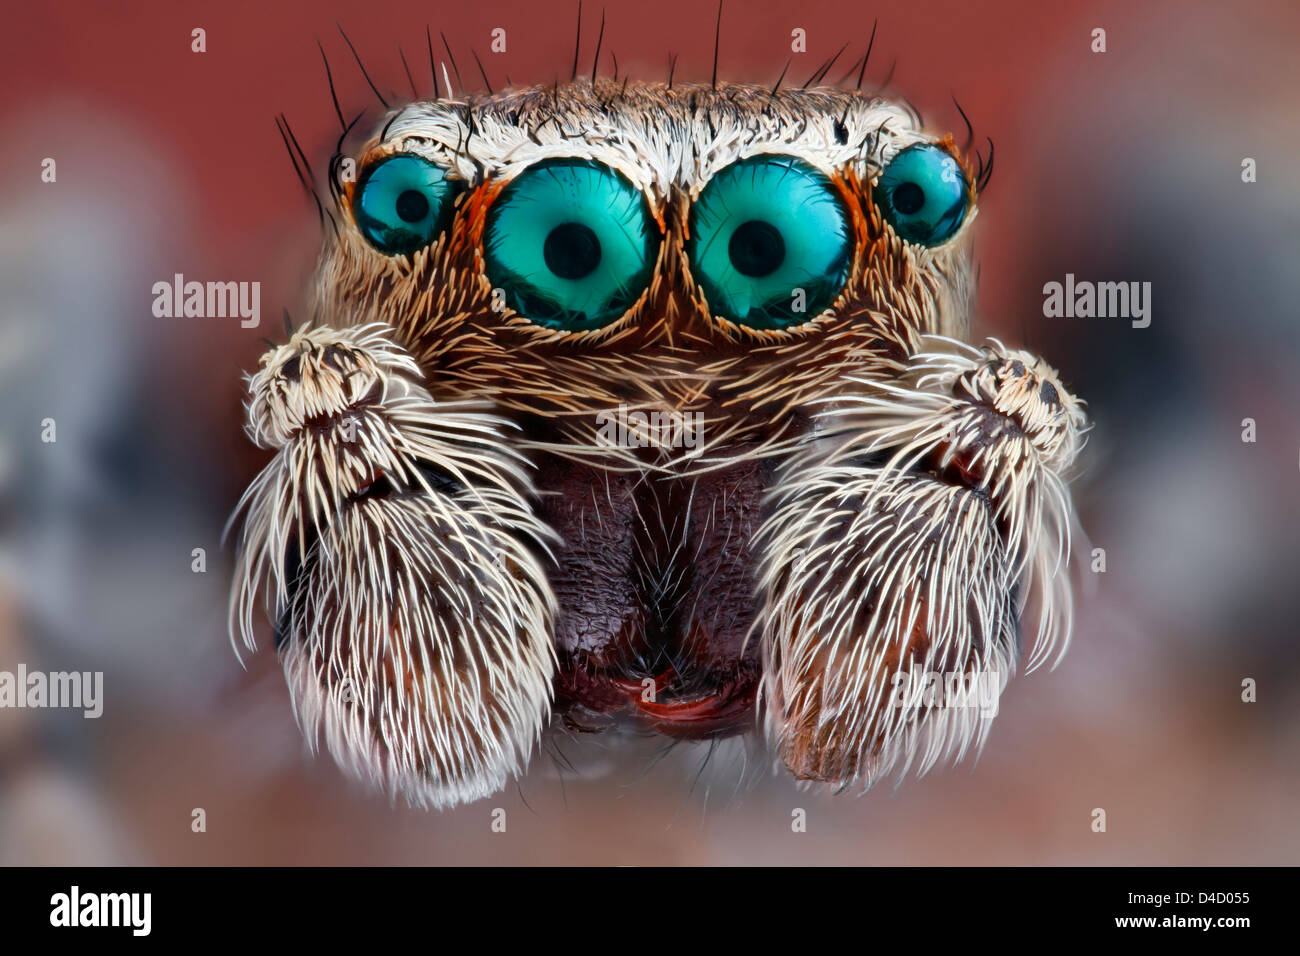 Head of a jumping spider (Salticidae), extreme close-up Stock Photo